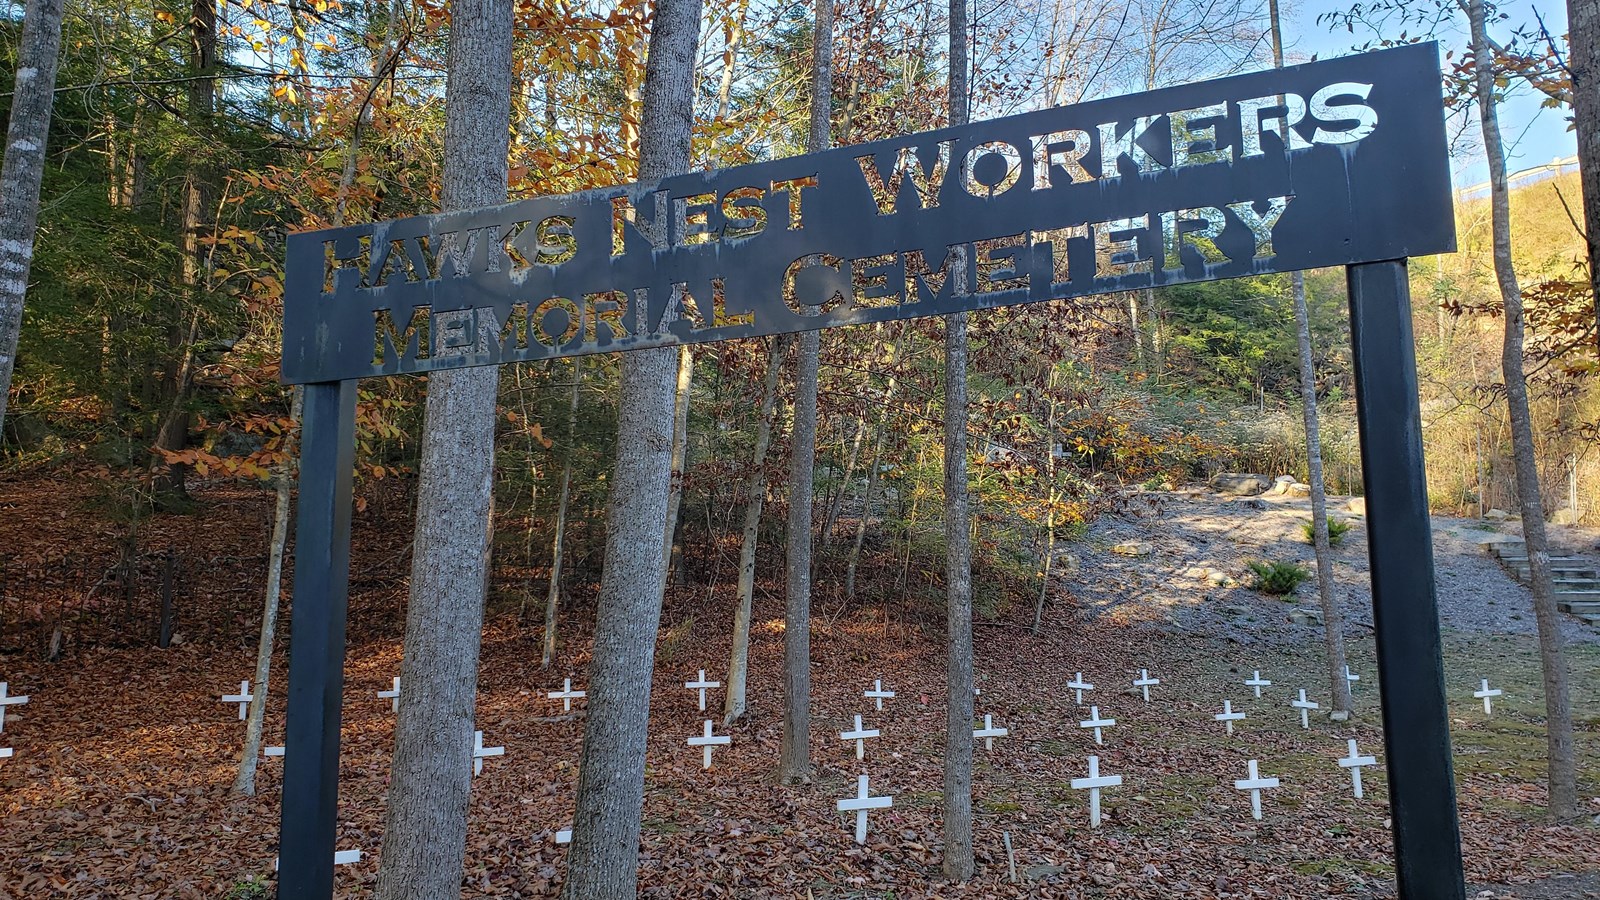 Workers memorial sign over entrence to cemetery 